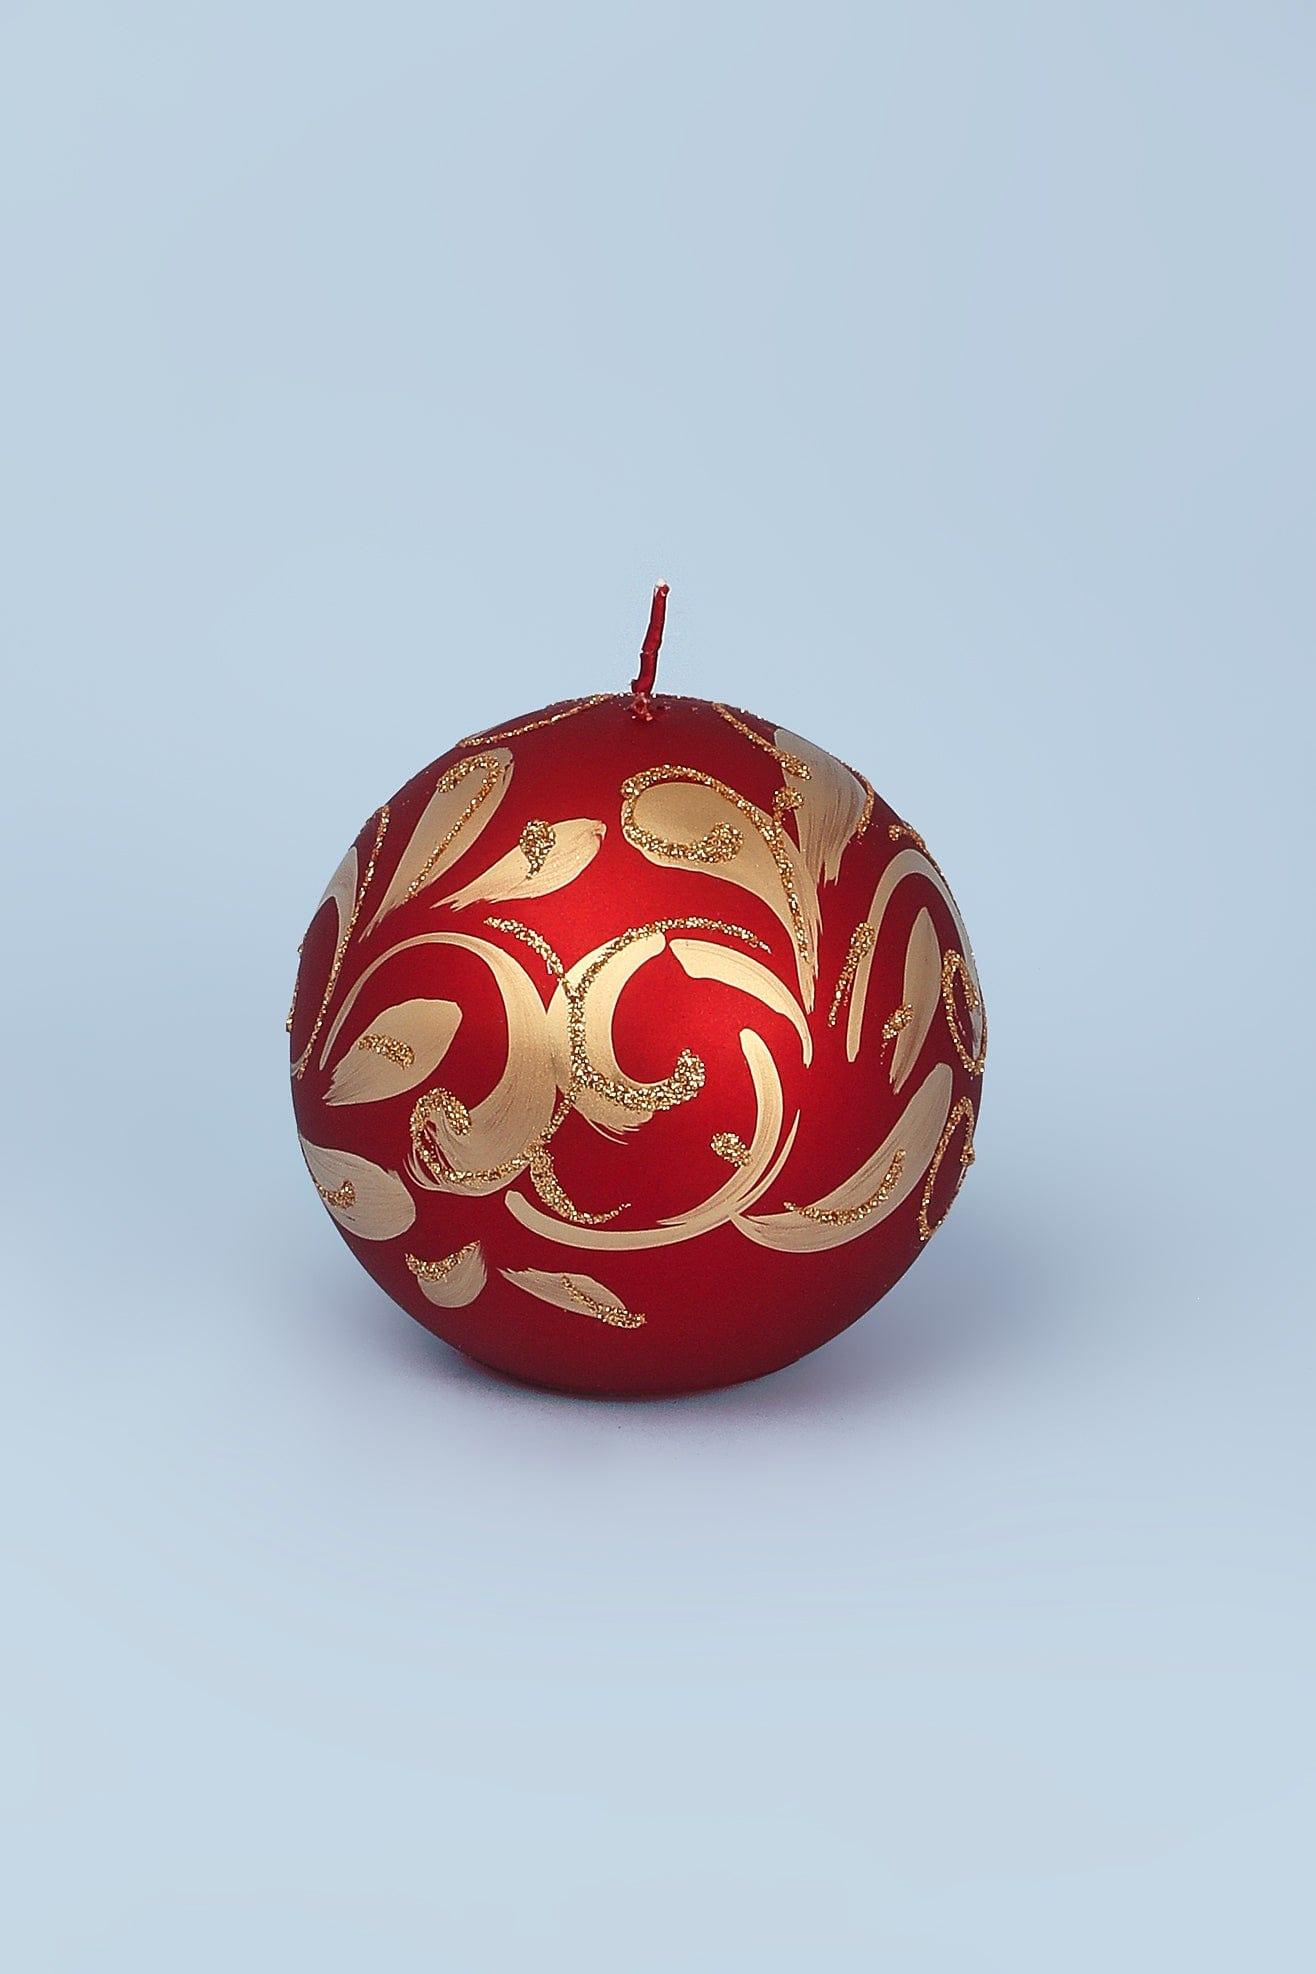 G Decor Candles & Candle Holders Red Coloured Florentino with Gold or Silver Glitter Festive Sphere Ball Candles